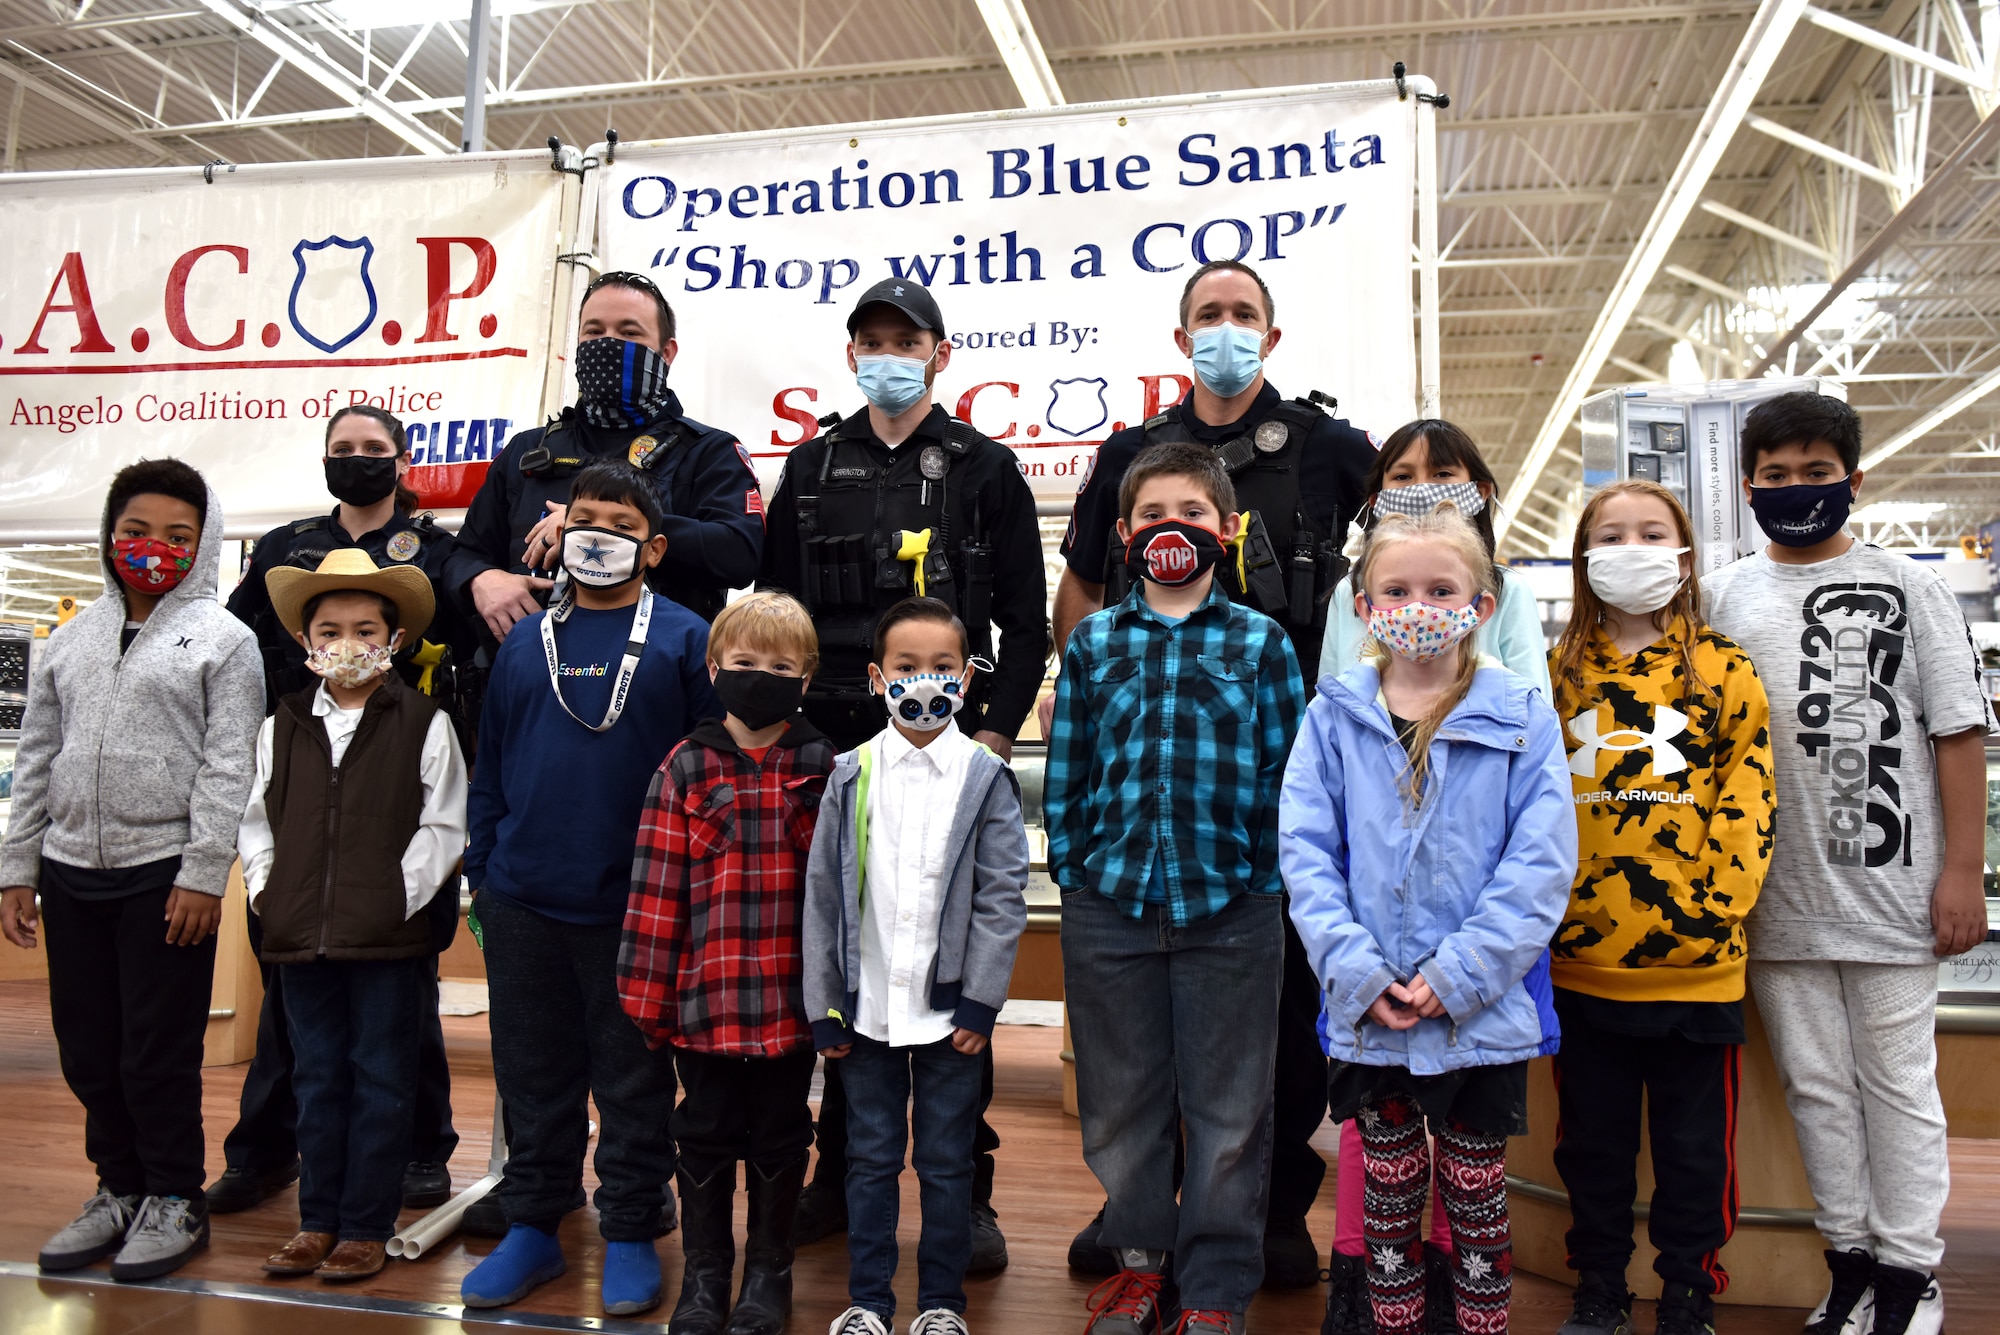 San Angelo Police Department volunteers pose with the first wave of children selected to participate in the 13th Annual Operation Blue Santa event in San Angelo, Texas, Dec. 12, 2020. After taking pictures with the police officers the children shopped for gifts for themselves and their families. (U.S. Air Force photo by Staff Sgt. Seraiah Wolf)